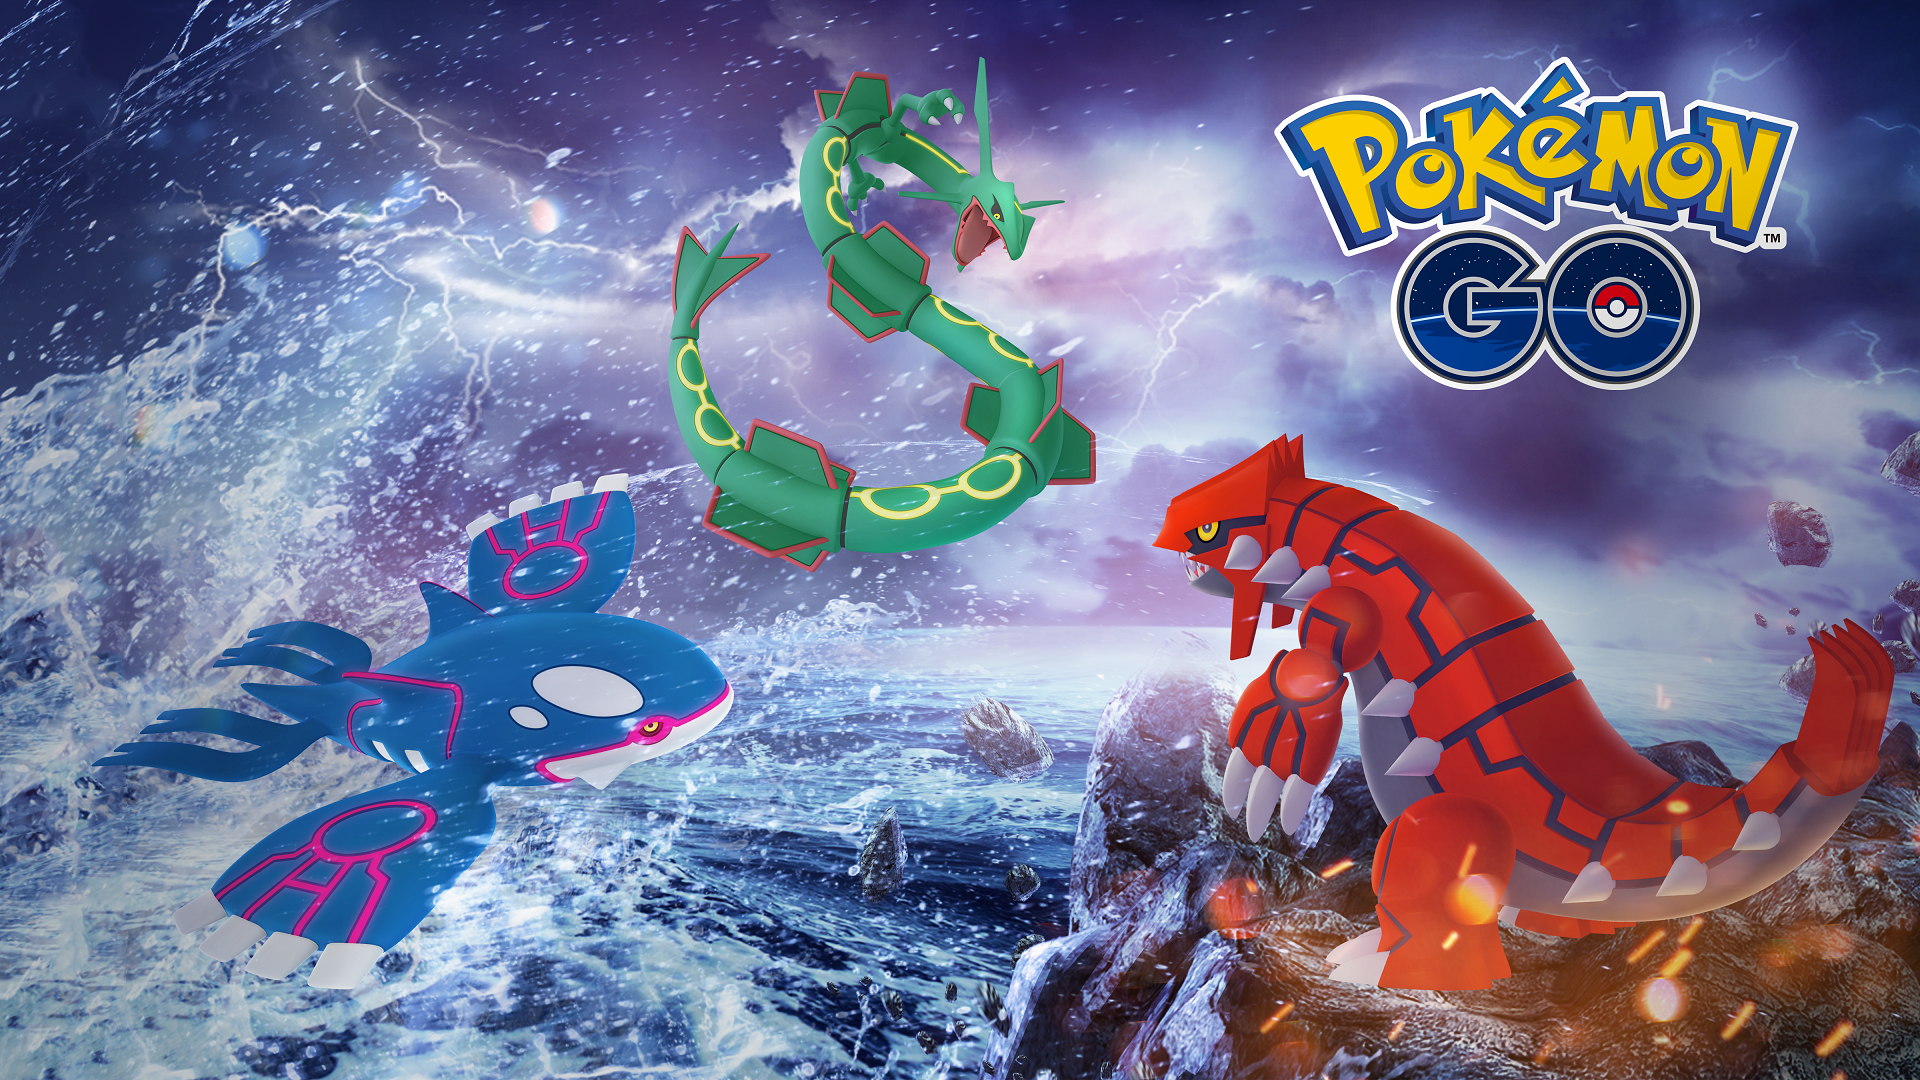 Pokémon Go legendary Pokémon: Promotional art showing three different Pokémon leaping at each other surrounding by crashing waves and lightning.